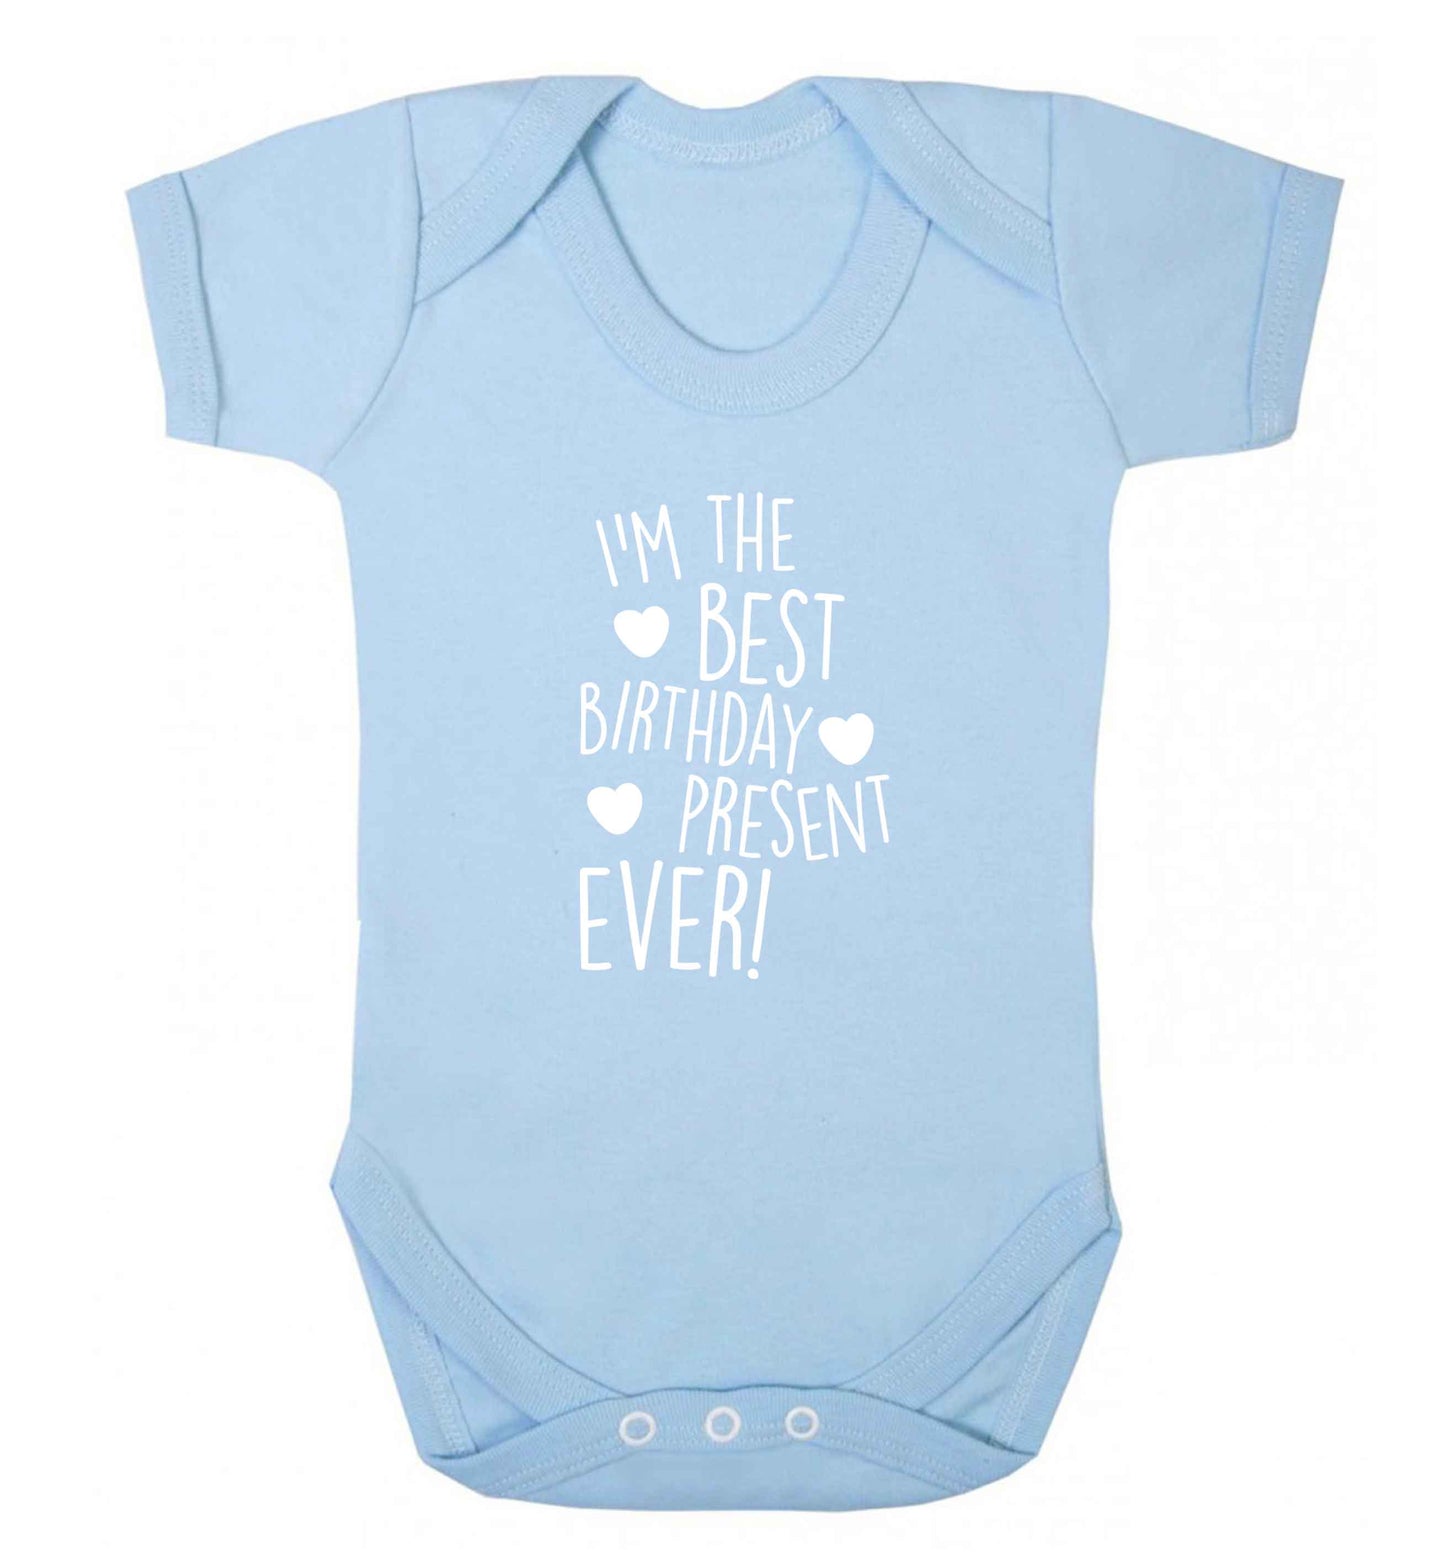 I'm the best birthday present ever baby vest pale blue 18-24 months